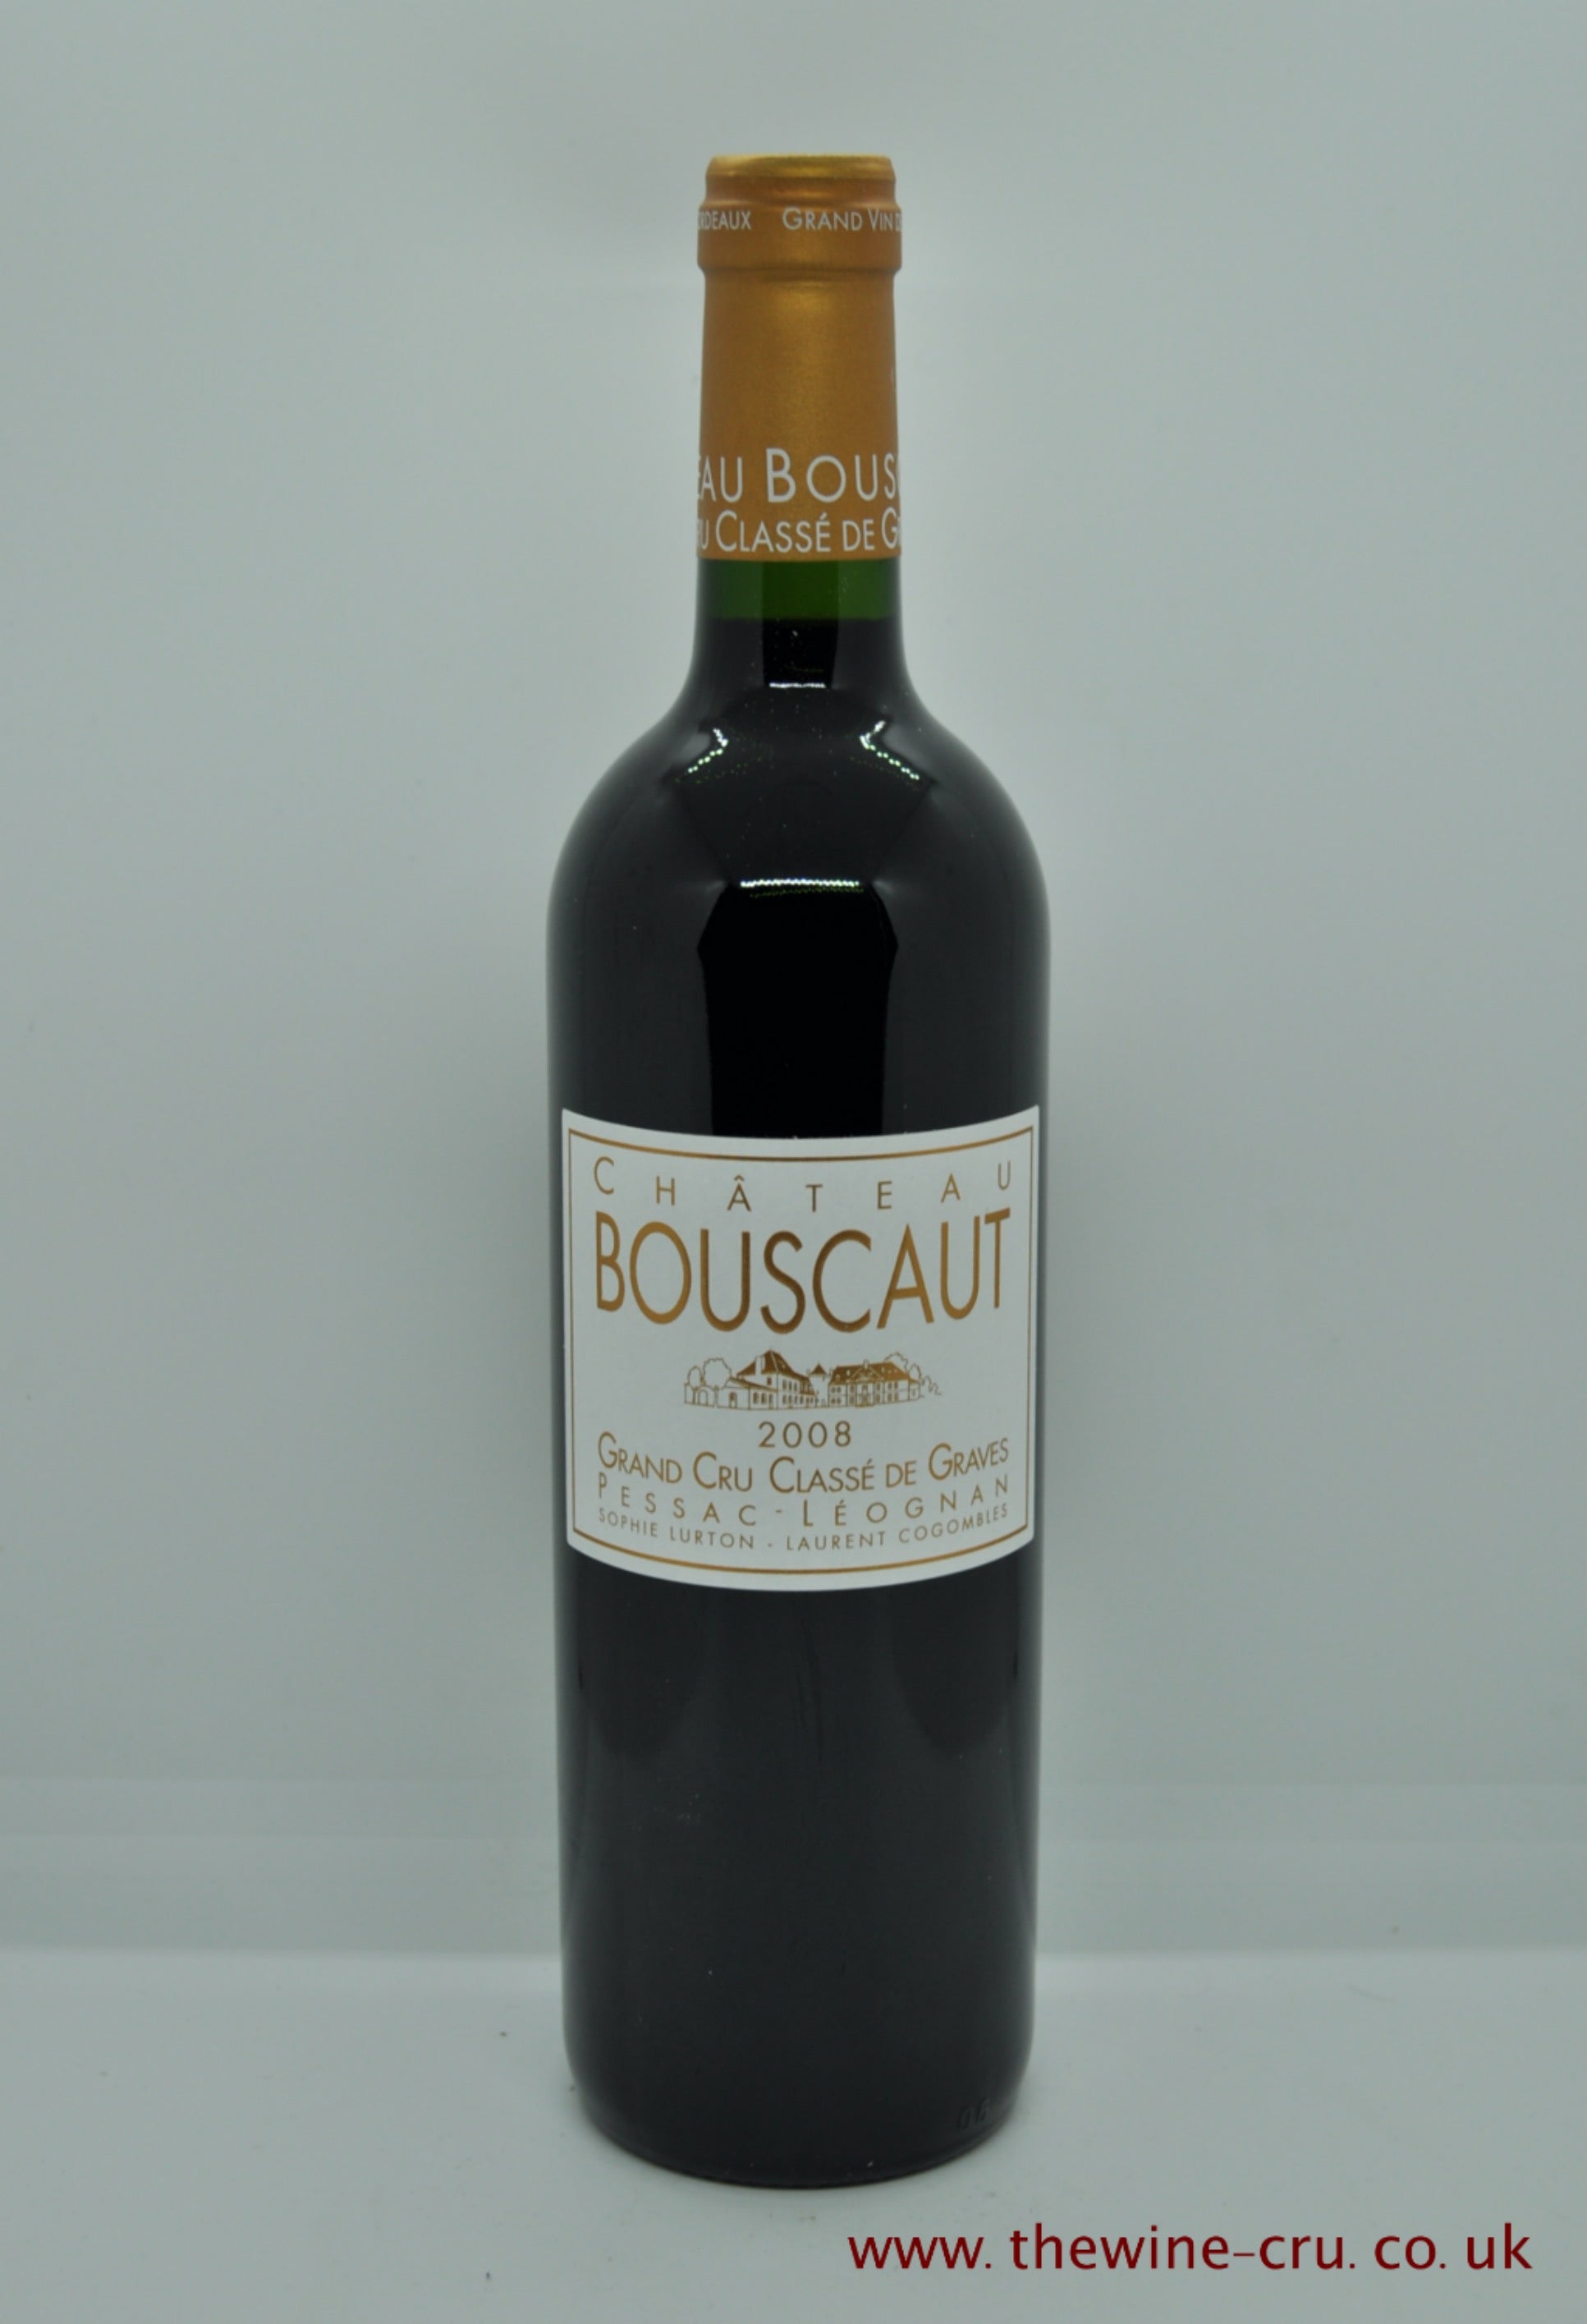 2008 vintage red wine. Chateau Bouscaut 2008.  France Bordeaux. Immediate delivery. Free local delivery. Gift wrapping available/